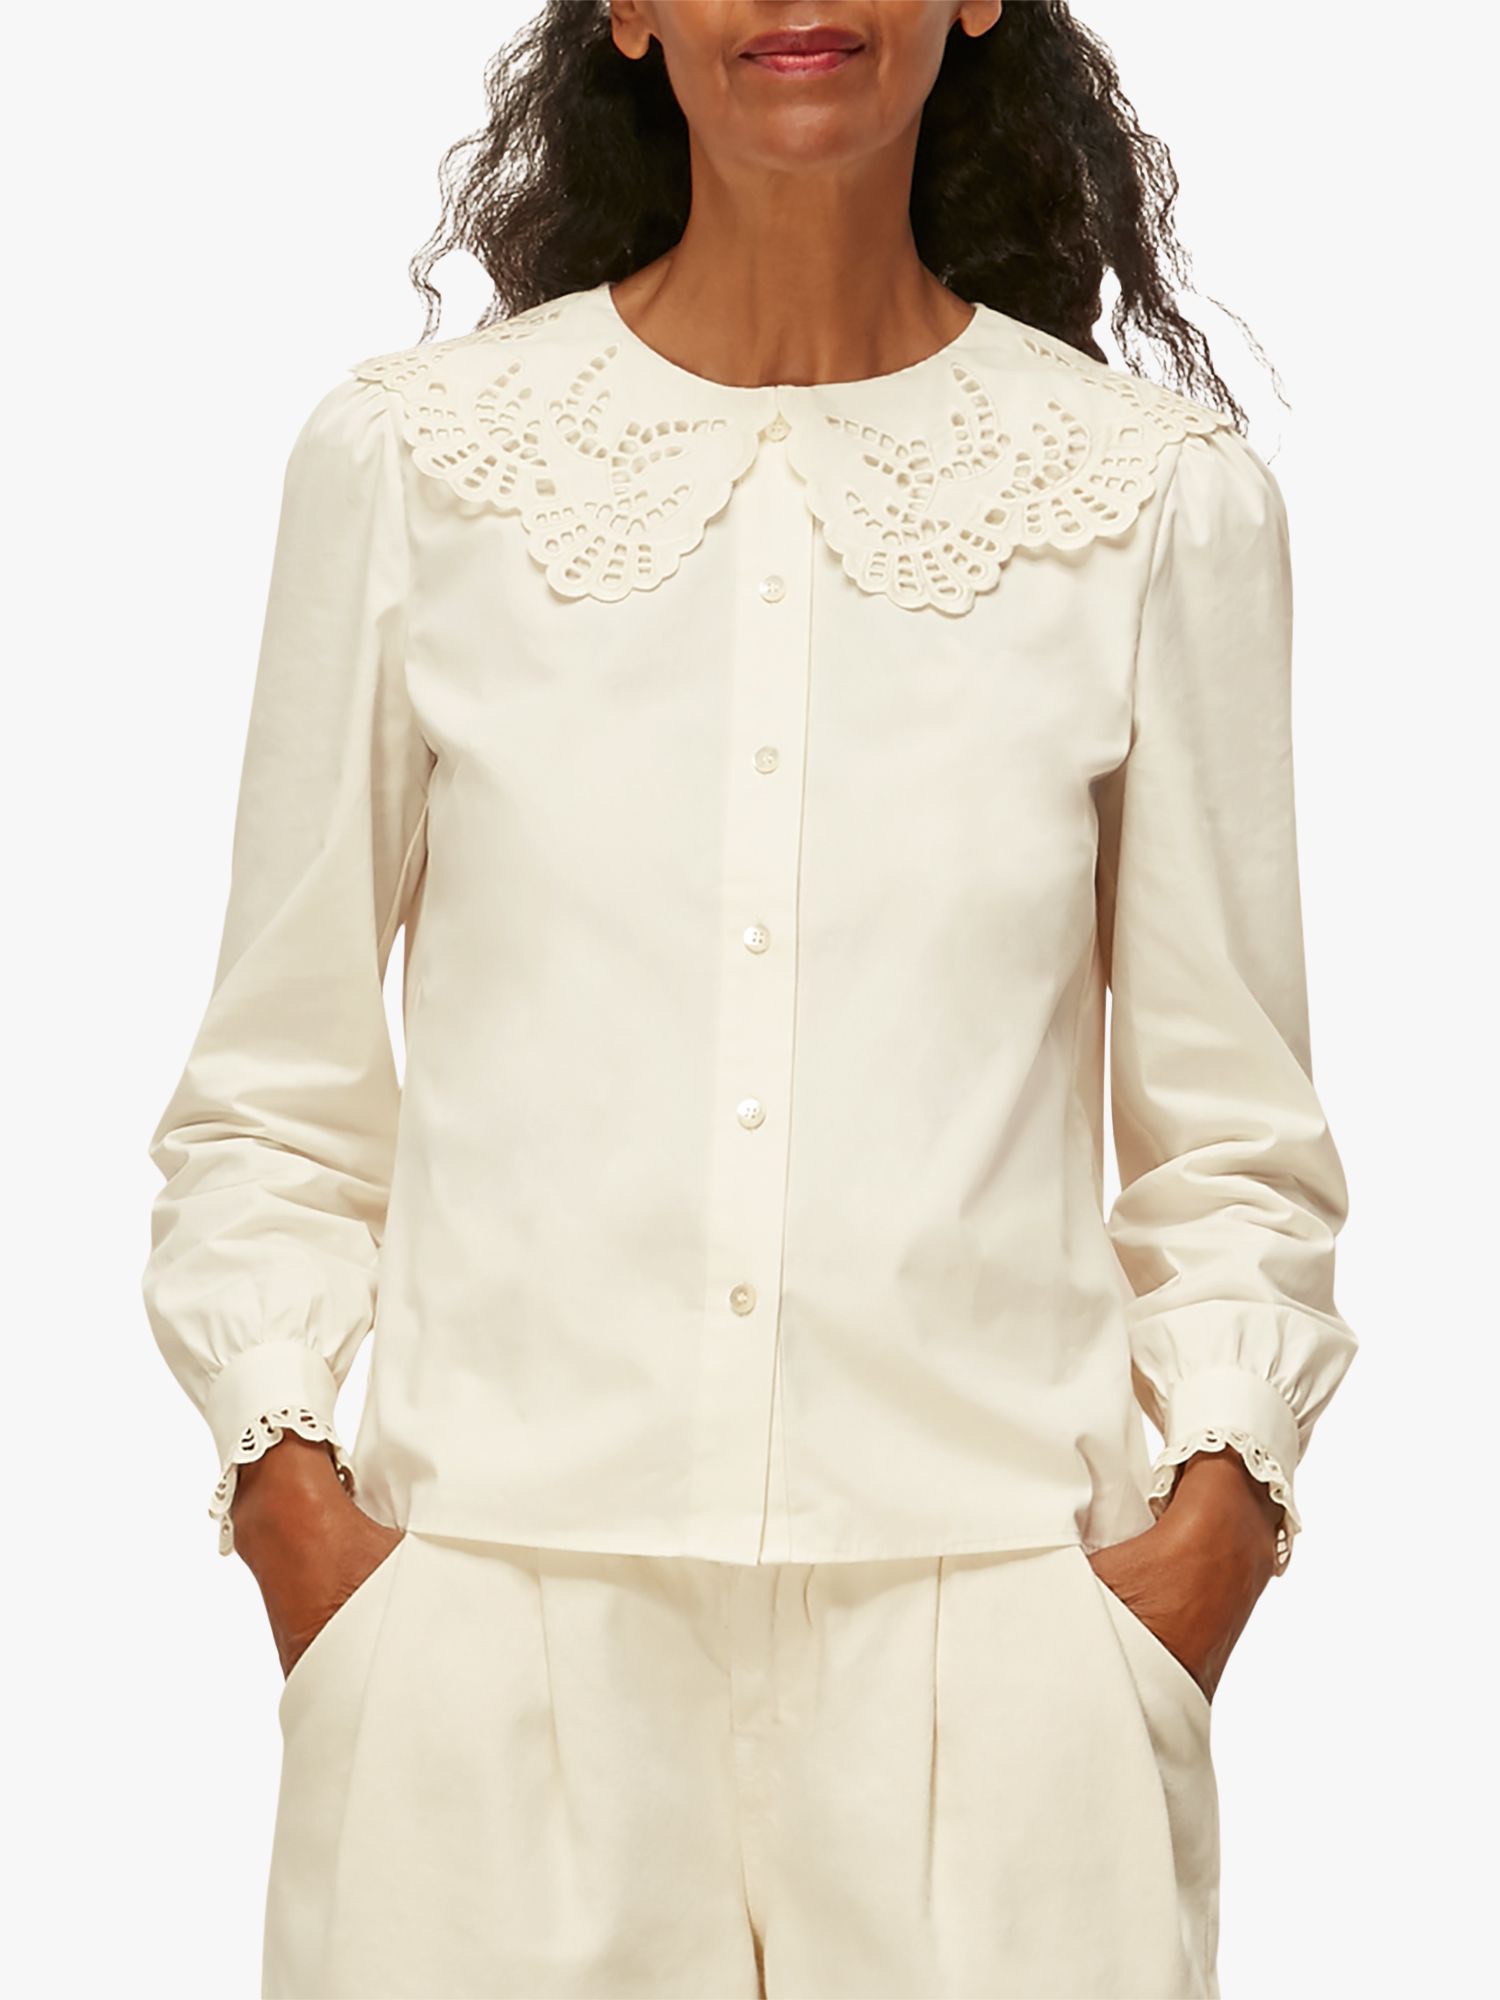 Fashion Tops Lace Tops The Limited Lace Top natural white simple style 